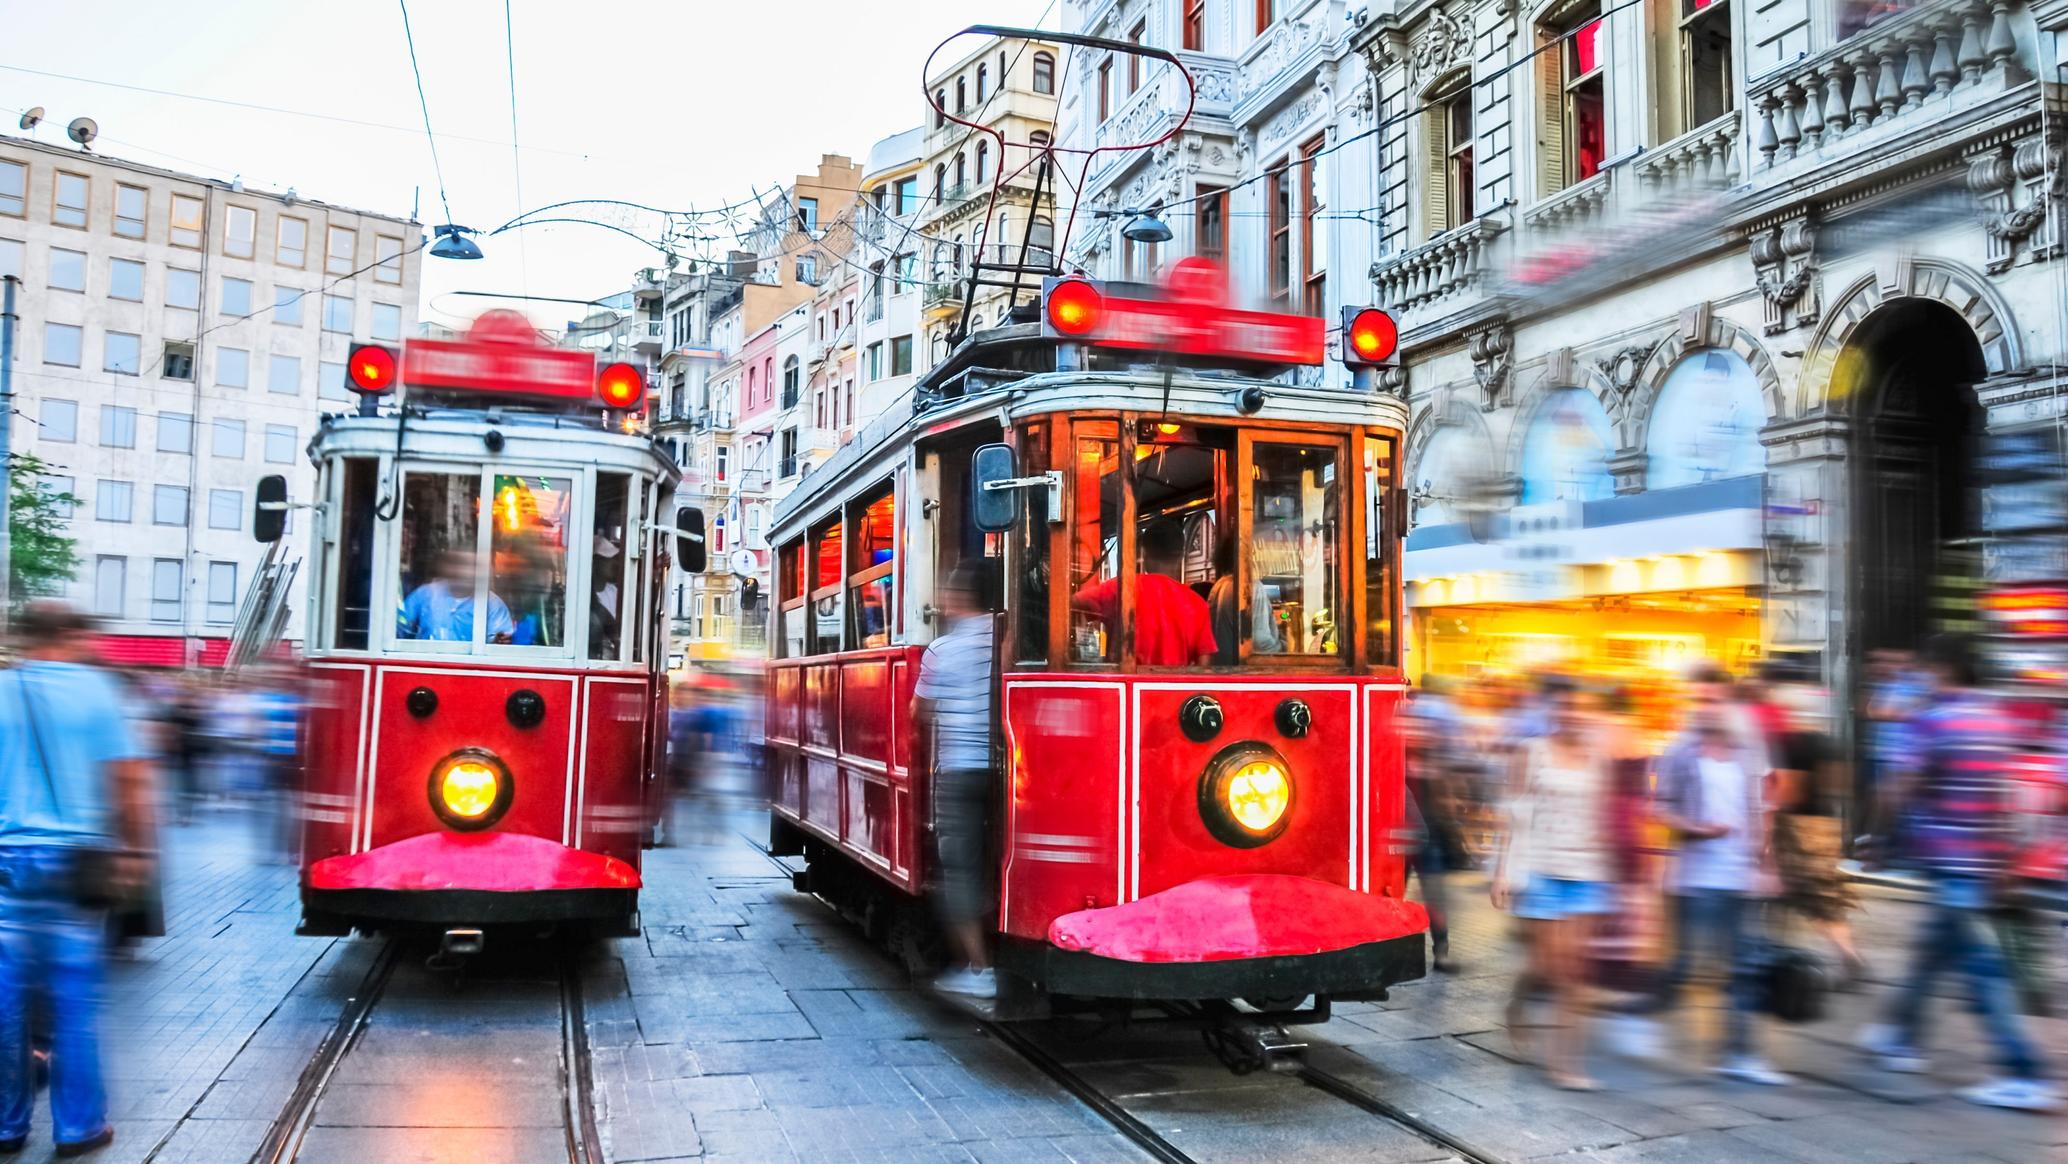 Iconic Tram on the Historic Istiklal Street